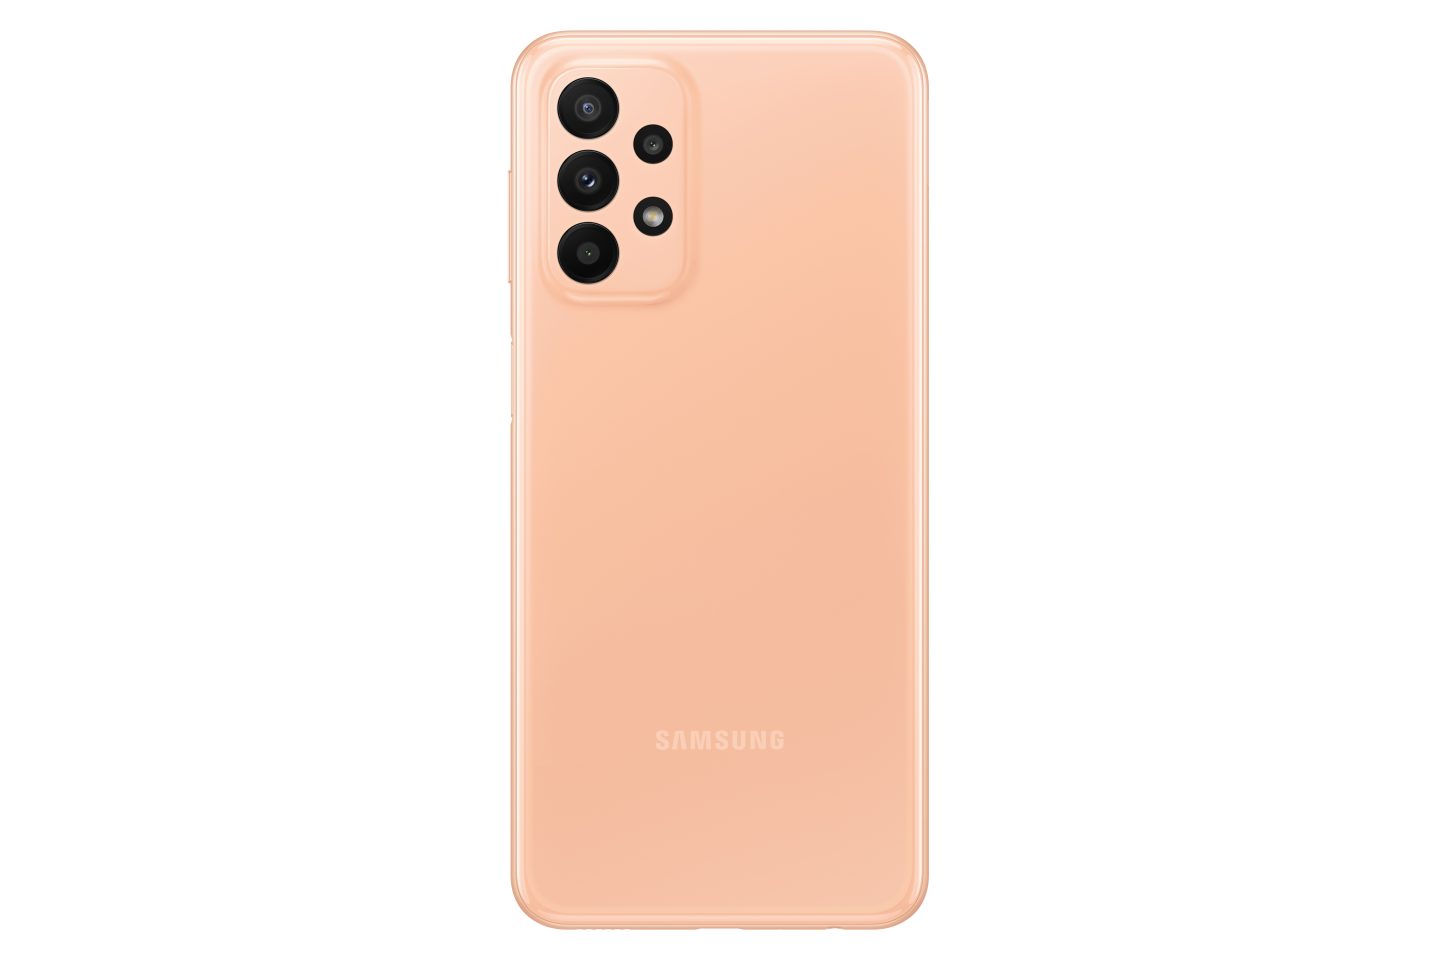 Samsung Galaxy A23 ( Peach ) 4G / LTE Smartphone with 6.6 Inch Display, Android 12, MicroSD Slot Up to 1TB, 5000 mAh Battery